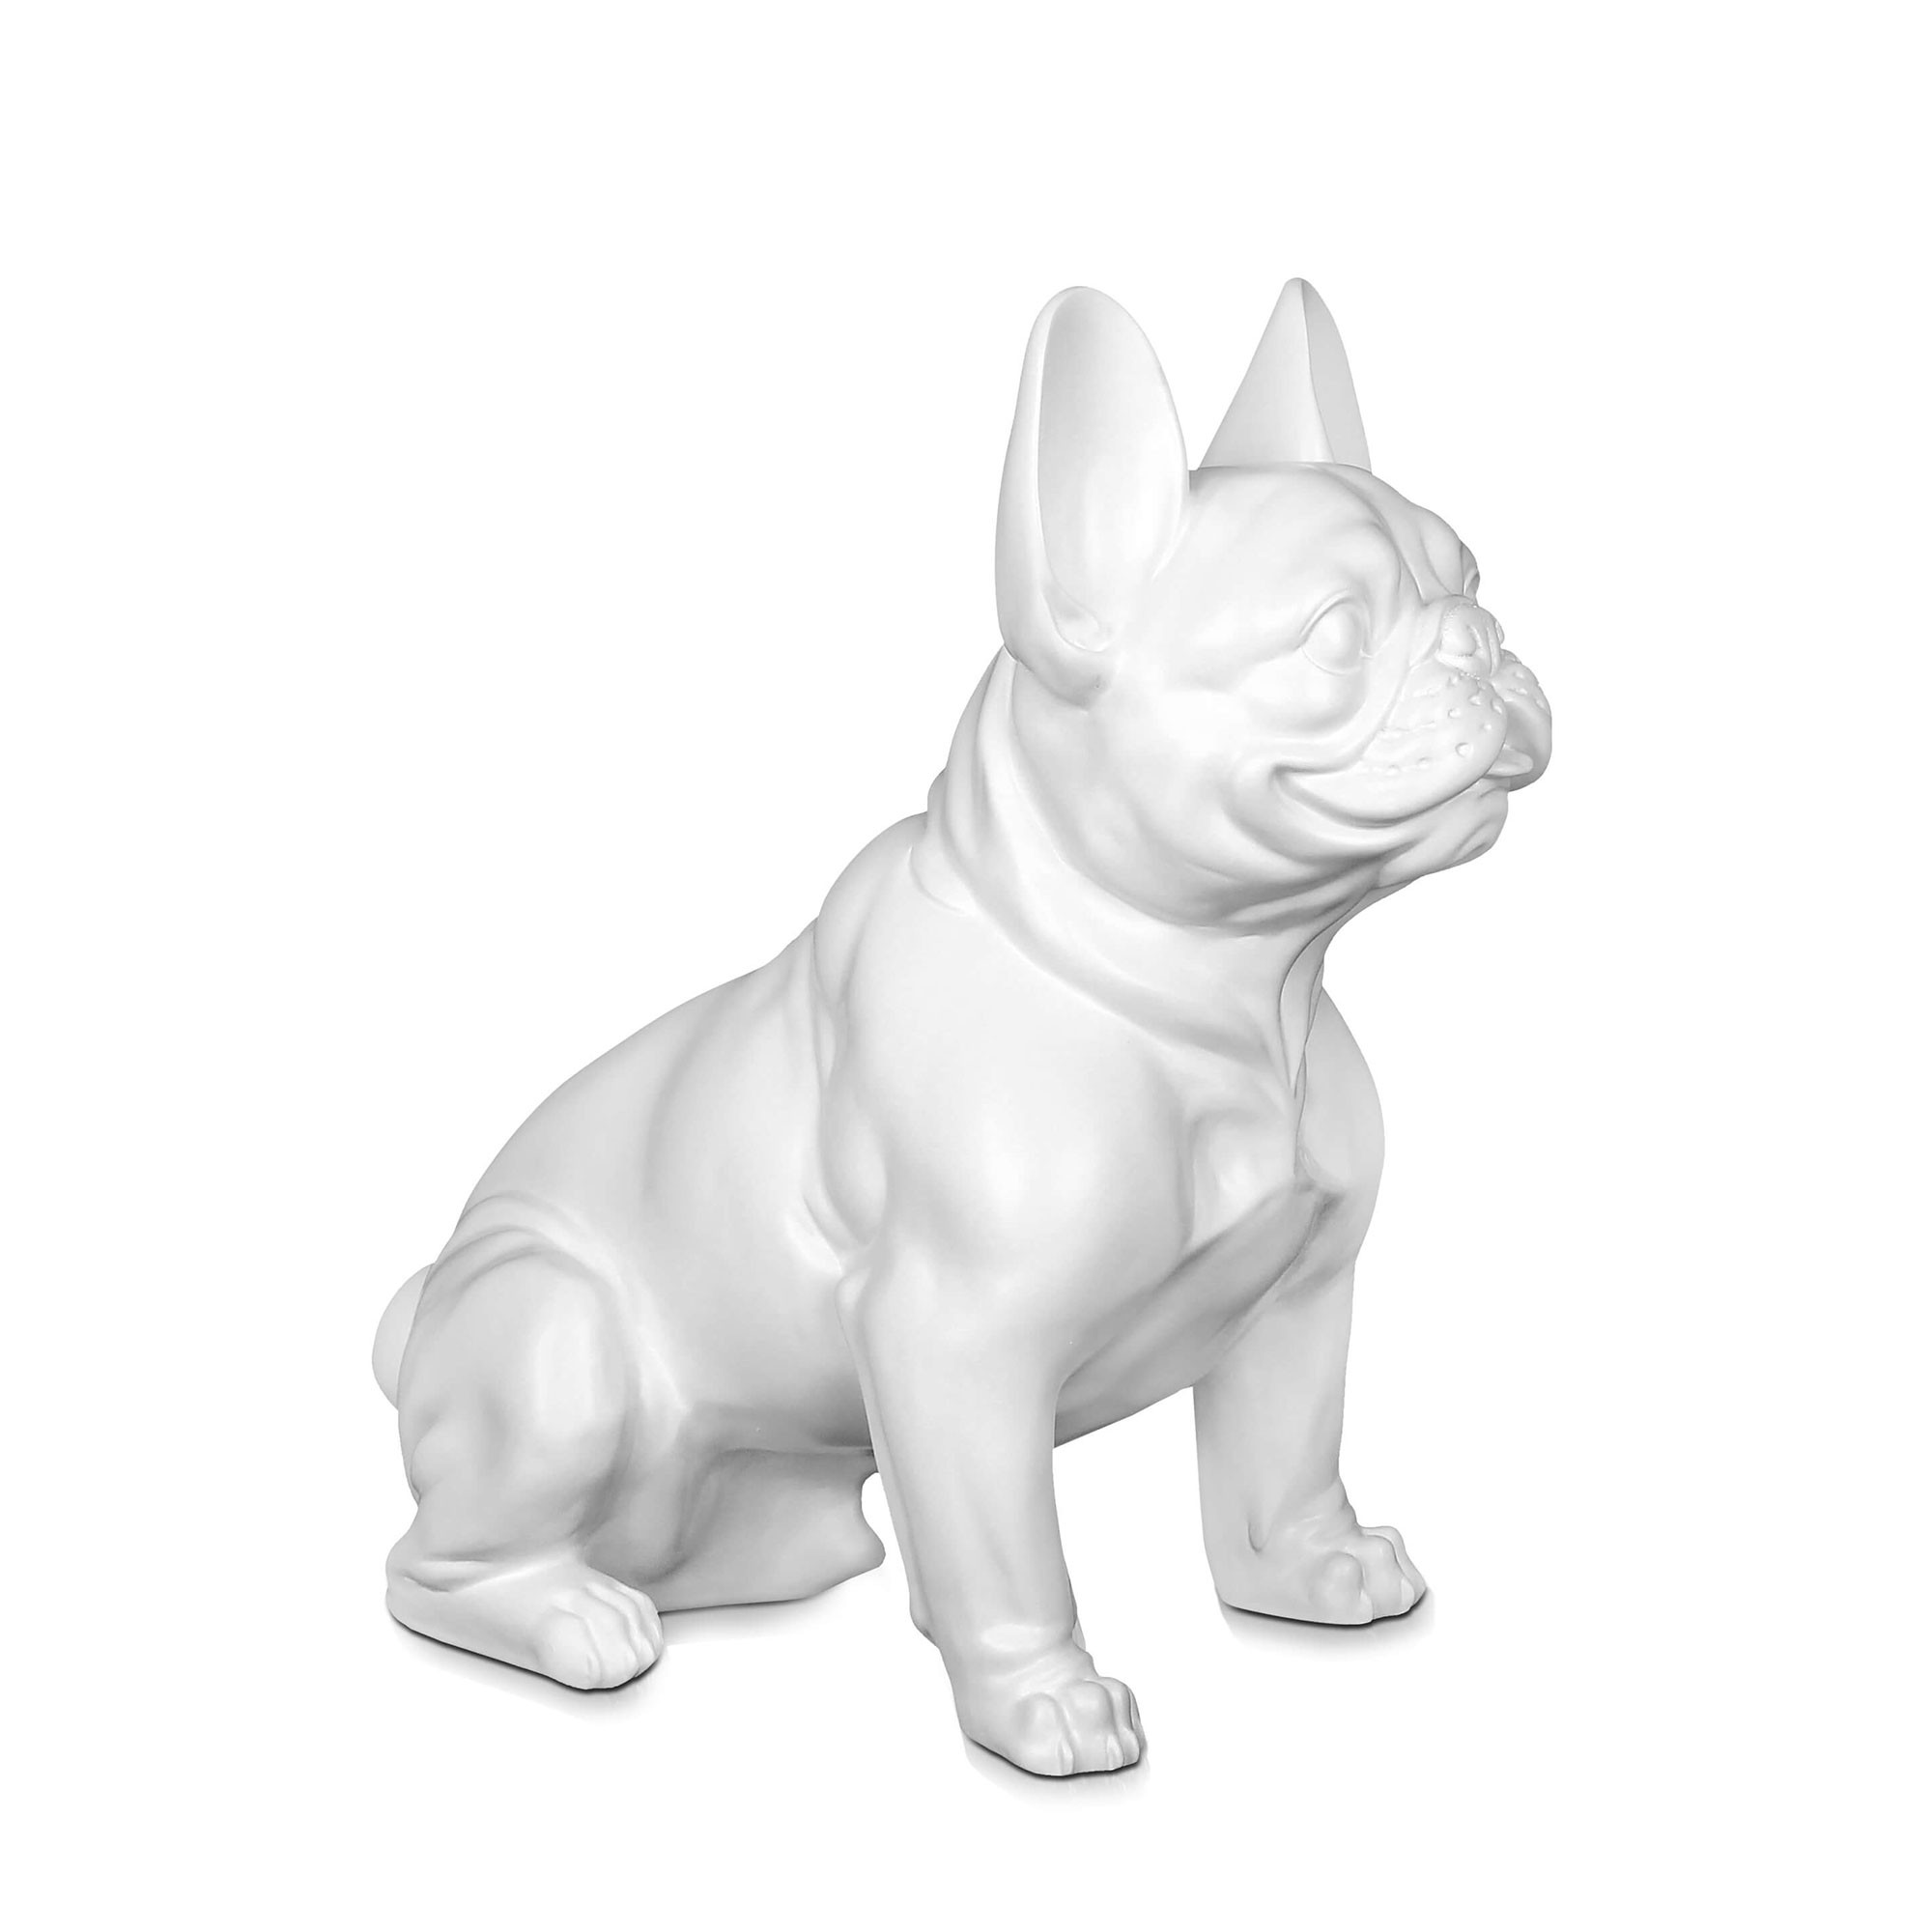 Resin sculpture depicting a white seated French bulldog